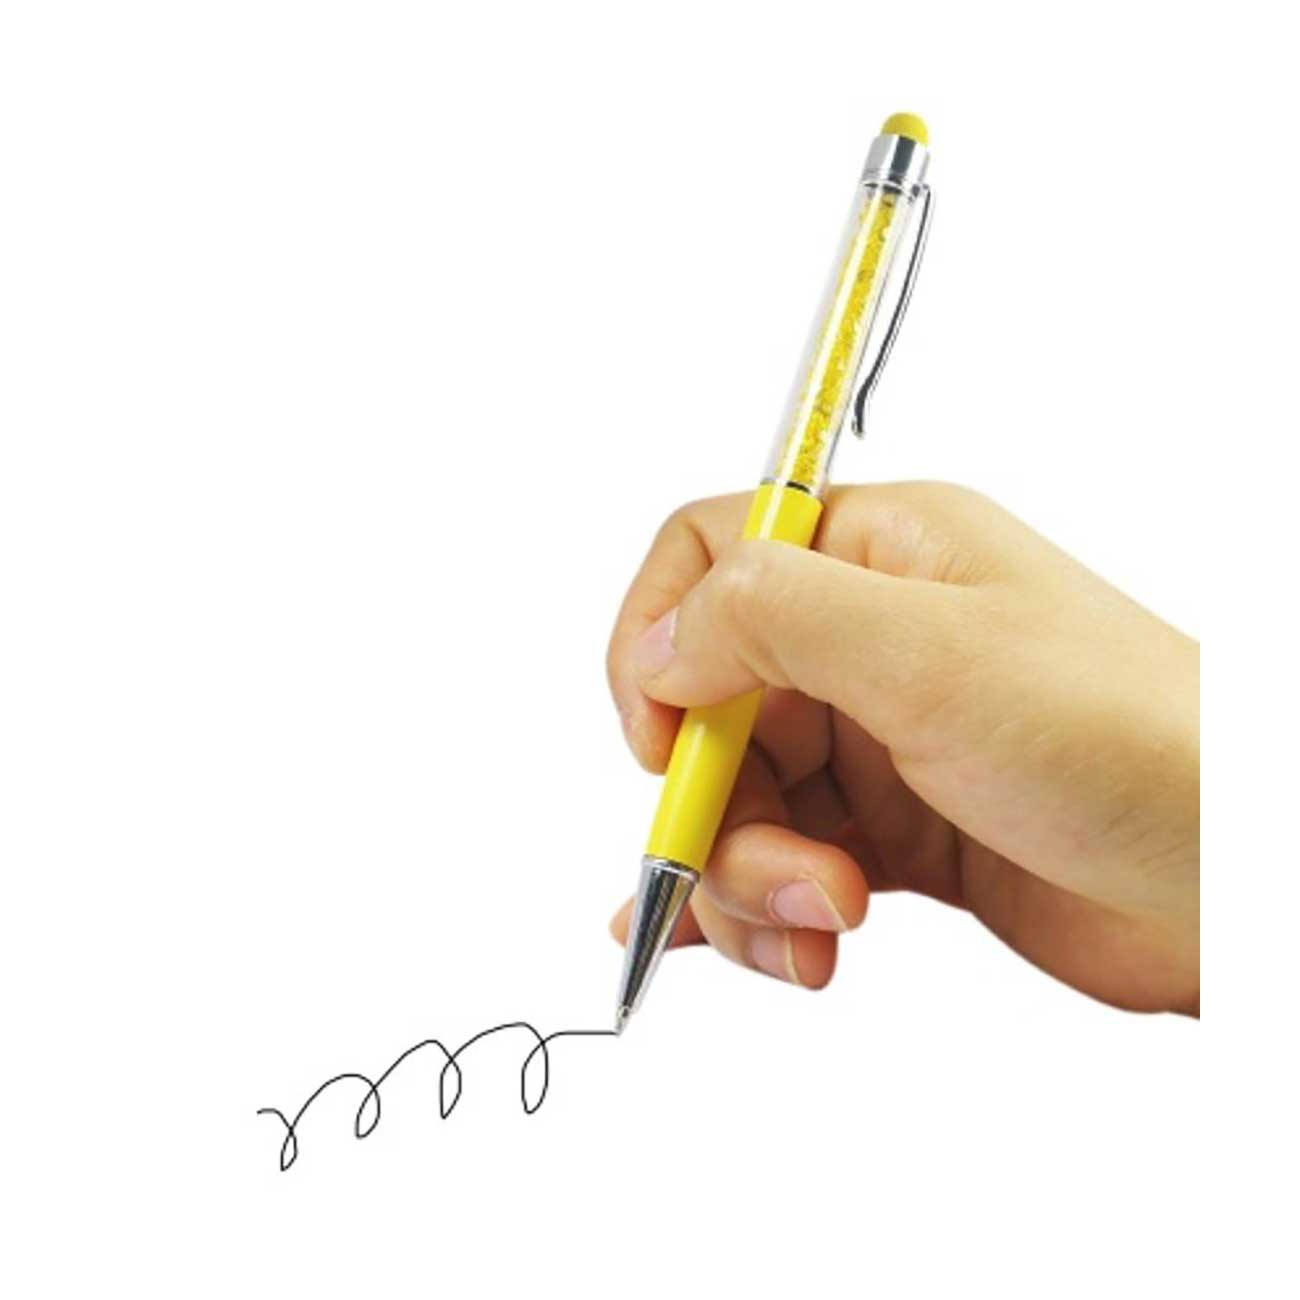 Crystal Stylus Touch Screen With Ink Pen In Yellow